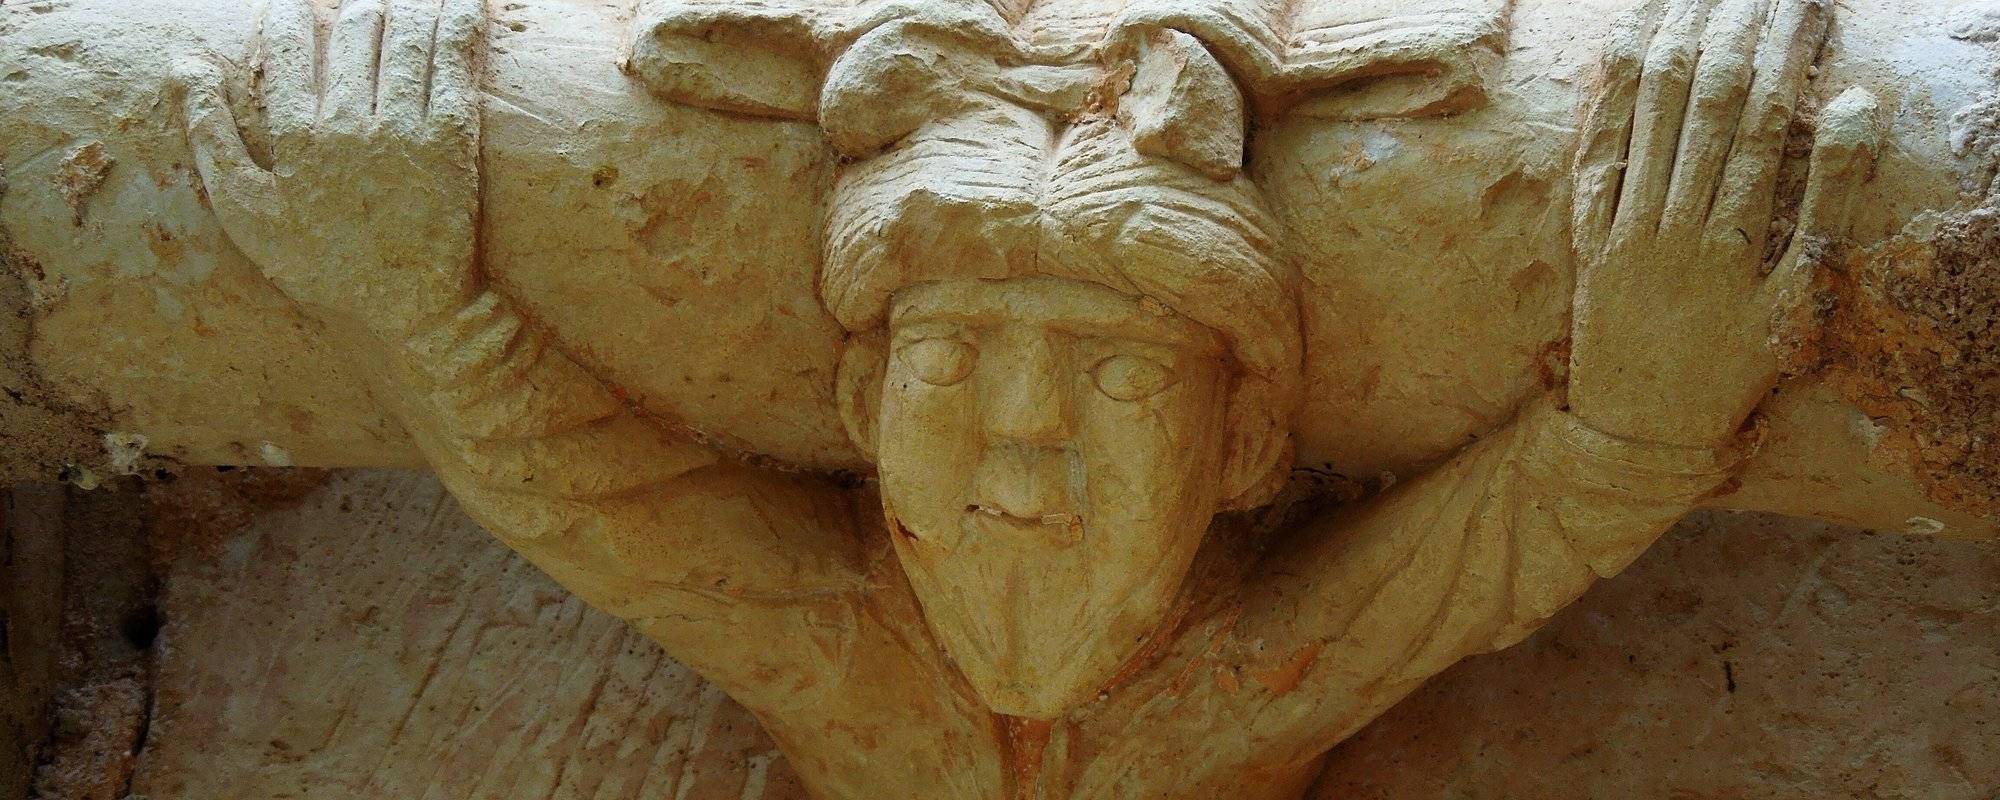 Mysterious places of the Camino de Santiago: the enigmatic contortionists of Atienza